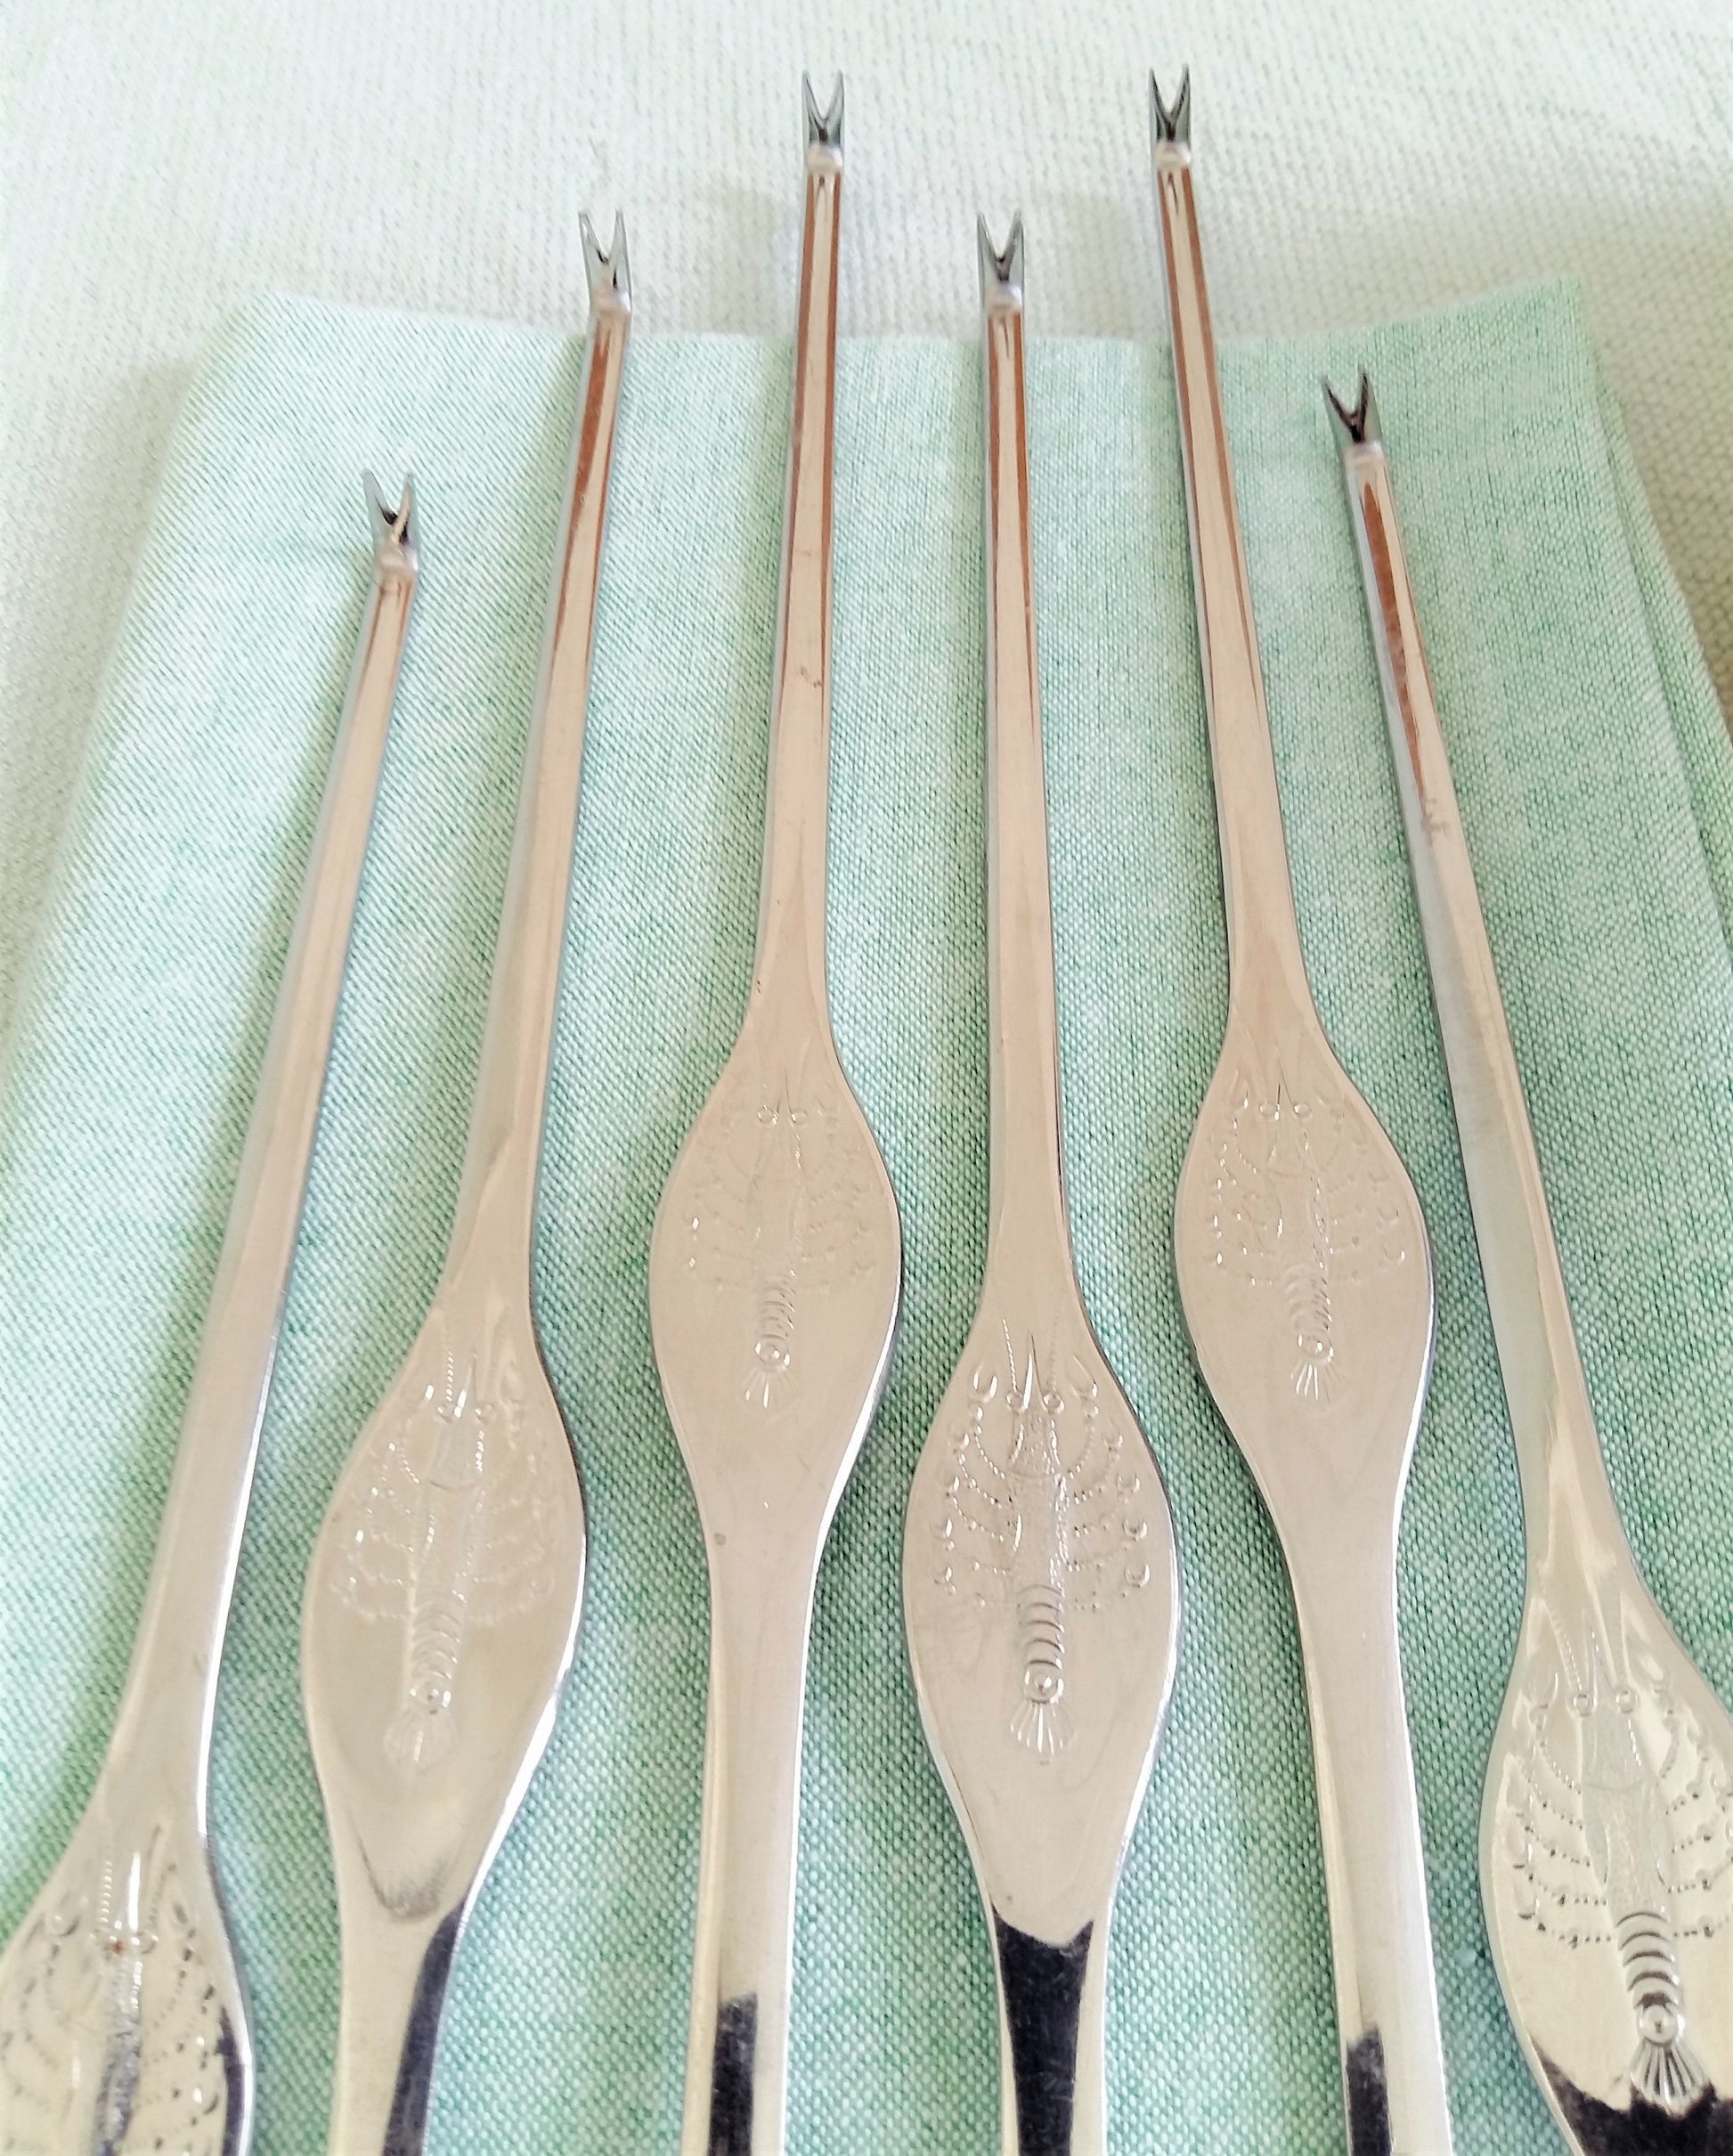 Six Lobster Picks. Crayfish, Crab Forks from Tiggy & Pip - €60.00! Shop now at Tiggy and Pip